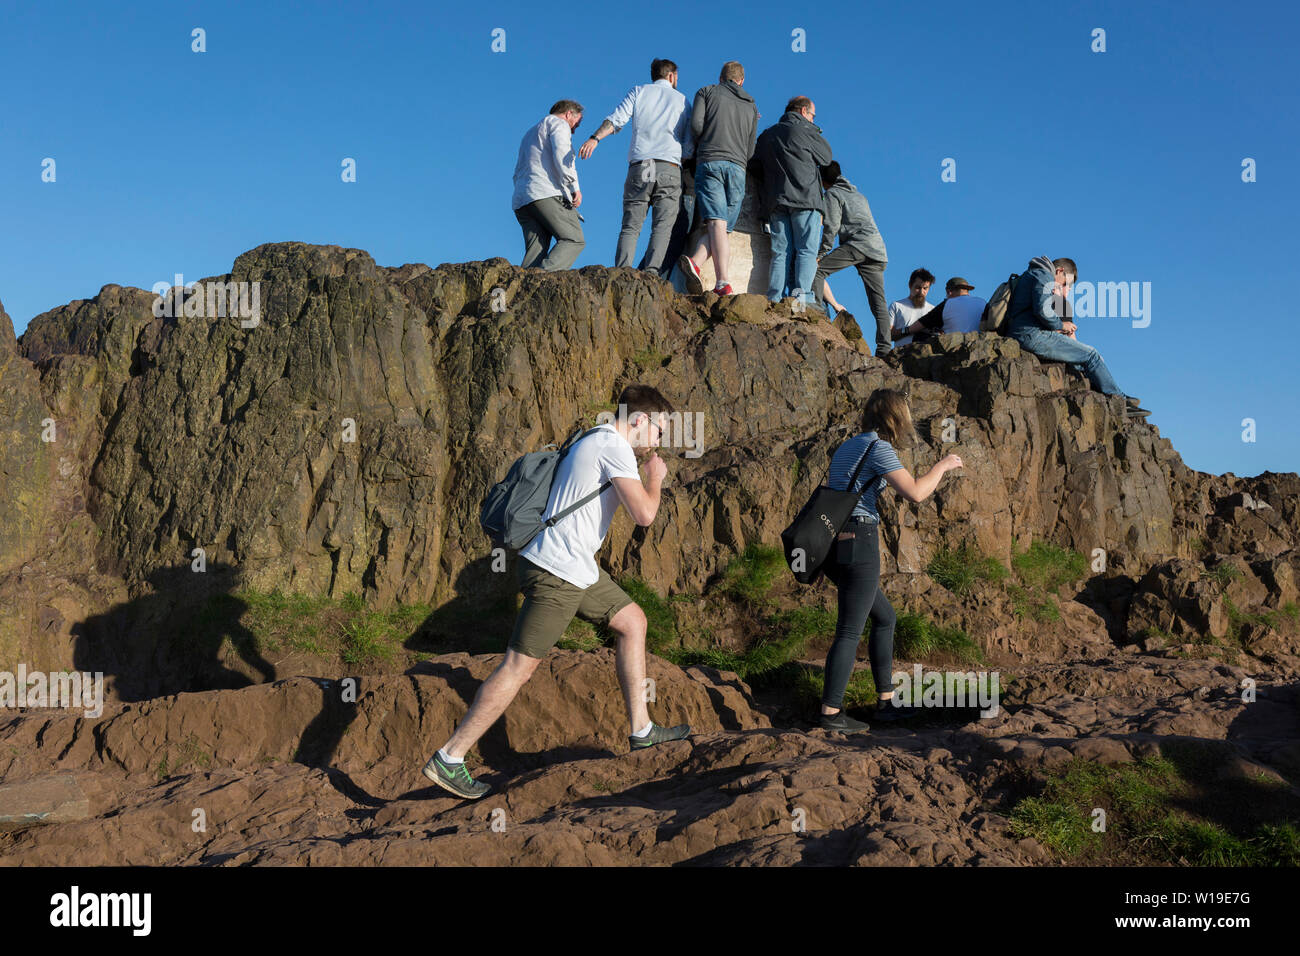 In summer evening sunshine, walkers climb the last metres to the summit of Arthur's Seat in Holyrood Park that overlooks the city of Edinburgh, on 26th June 2019, in Edinburgh, Scotland. Arthur's Seat is an extinct volcano which is considered the main peak of the group of hills in Edinburgh, Scotland, which form most of Holyrood Park, described by Robert Louis Stevenson as 'a hill for magnitude, a mountain in virtue of its bold design'. The hill rises above the city to a height of 250.5 m (822 ft), providing excellent panoramic views of the city and beyond. Stock Photo